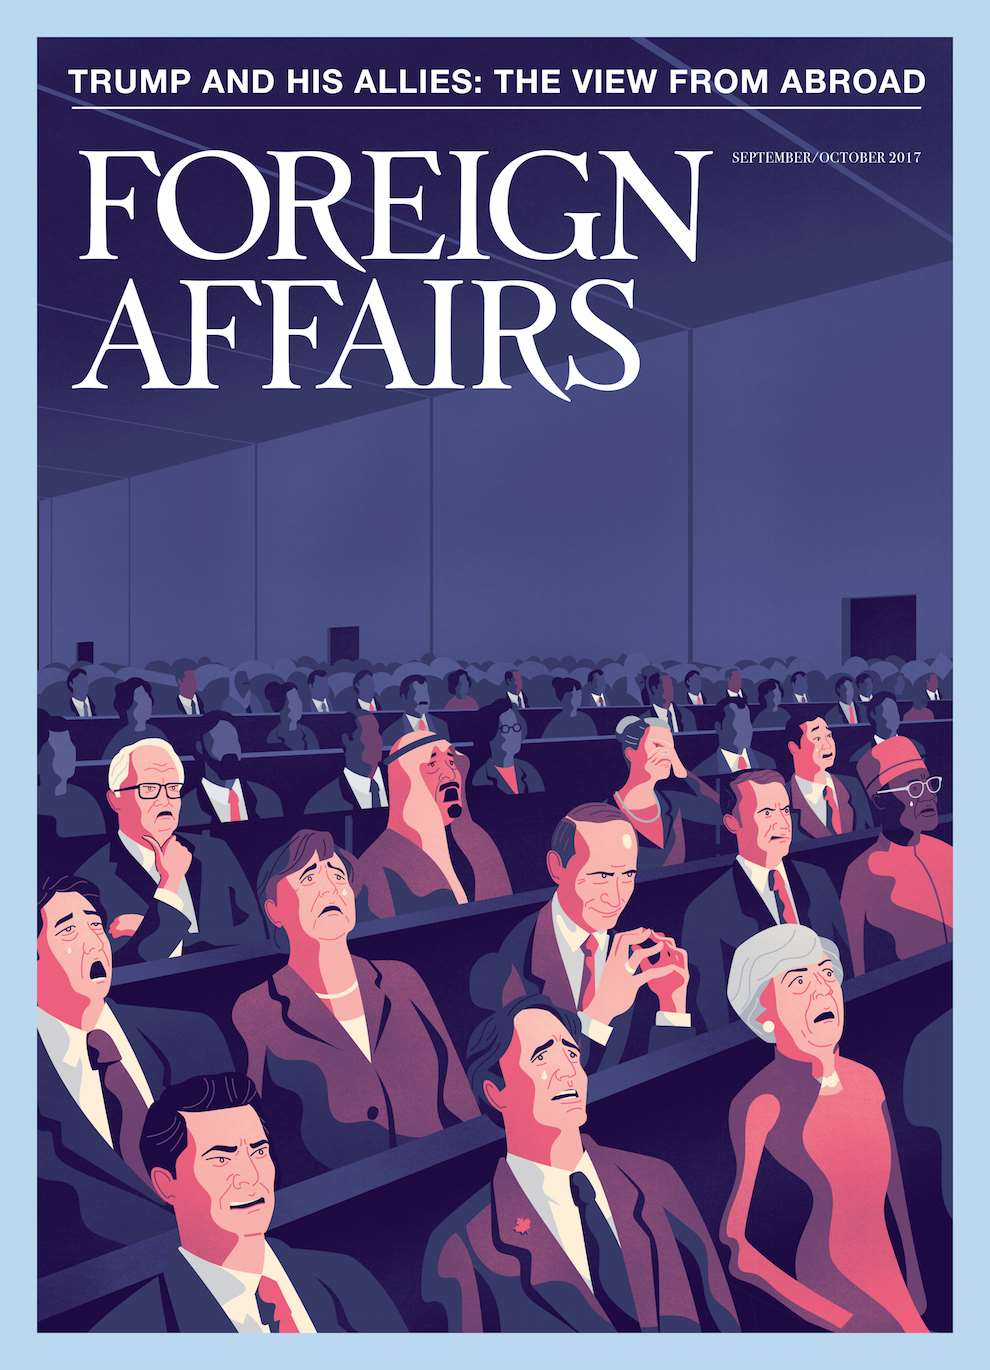 Jack Daly, Digital illustrated Foreign Affairs Poster titled 'Trump and his Allies: The view from Abroad,  with illustrated Theresa May and Putin.